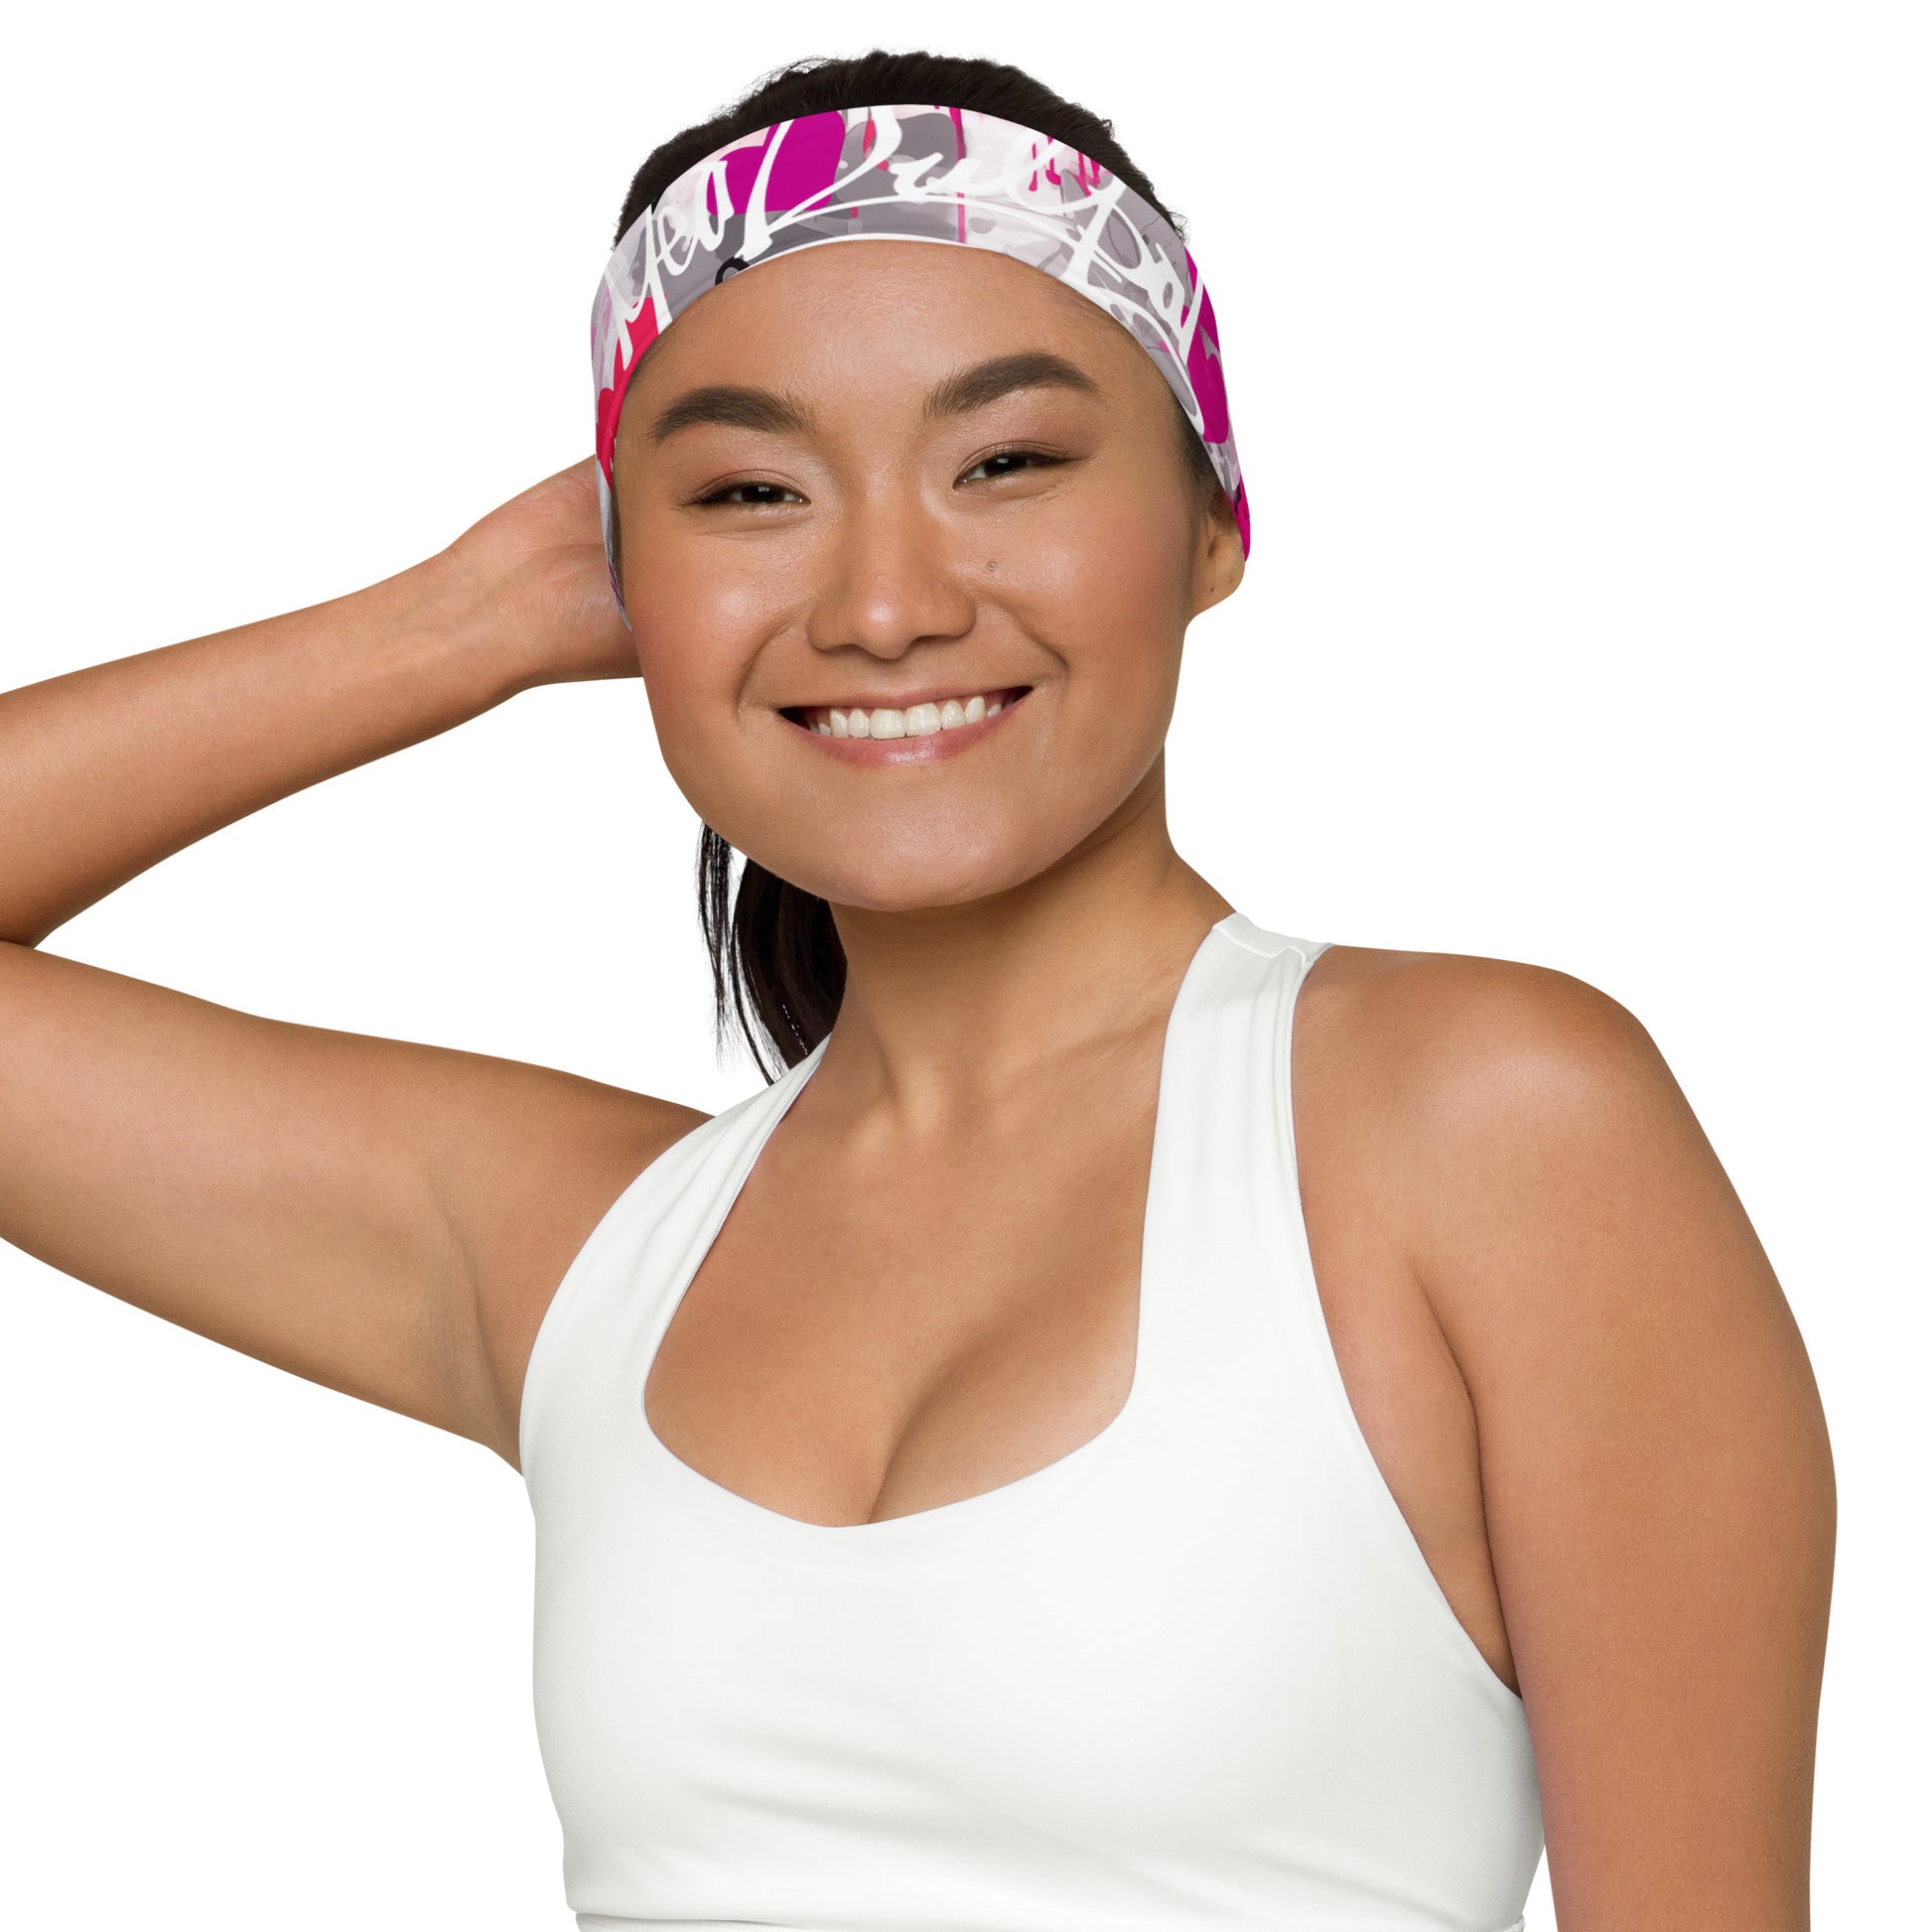 Comfortable Stretch: The soft and stretchy fabric of the MeaKulpa Headband ensures a snug yet comfortable fit, making it the perfect companion for your workouts or casual dressing.